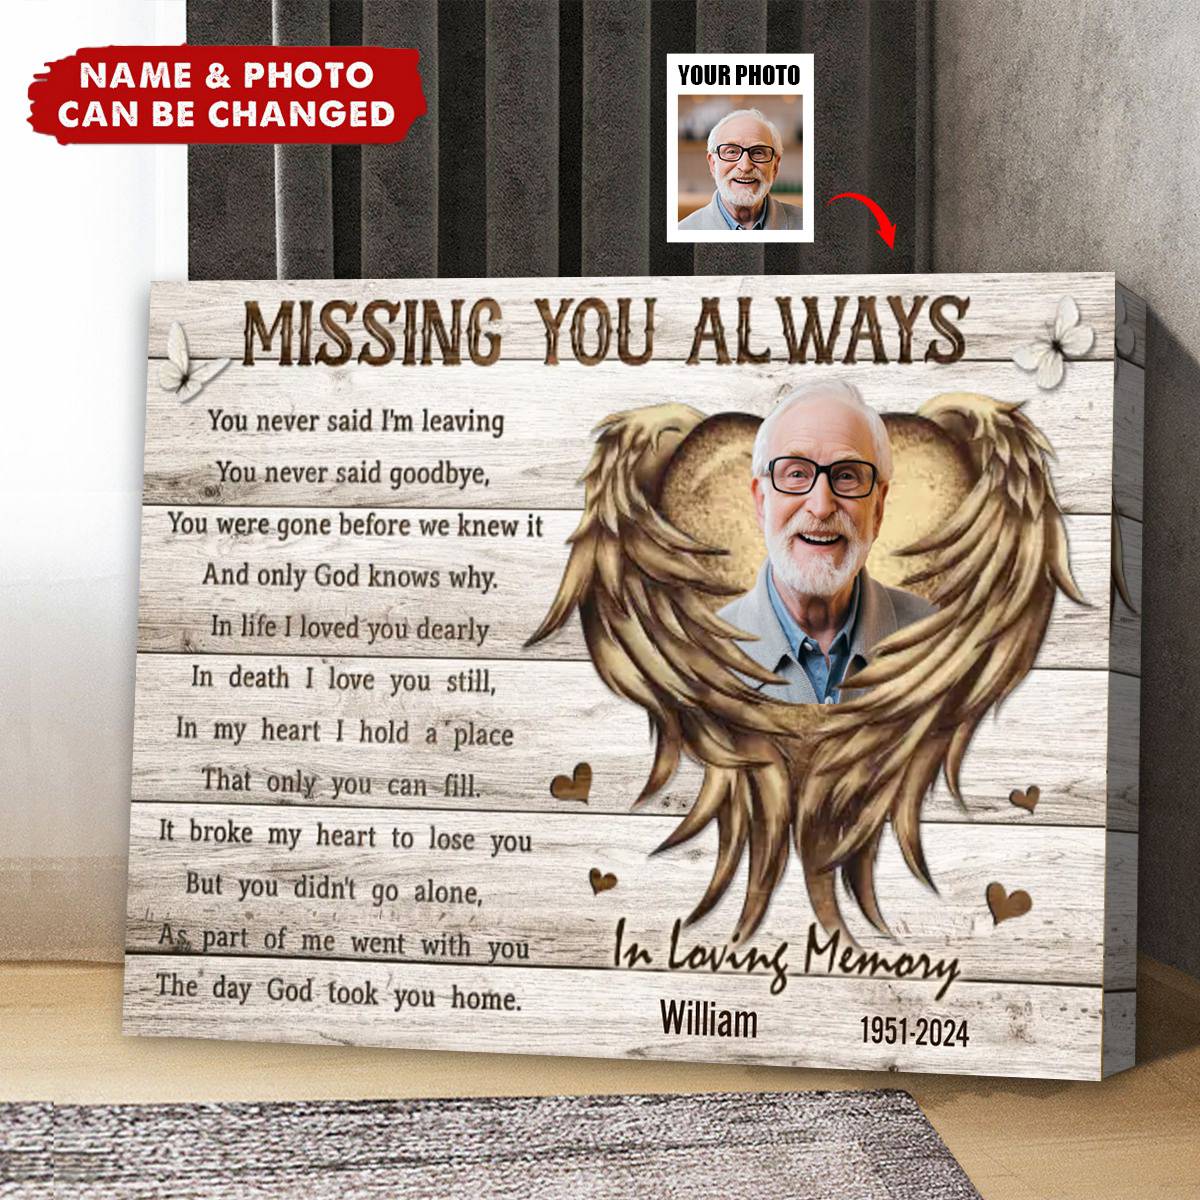 Personalized Photo Canvas - Missing You Always